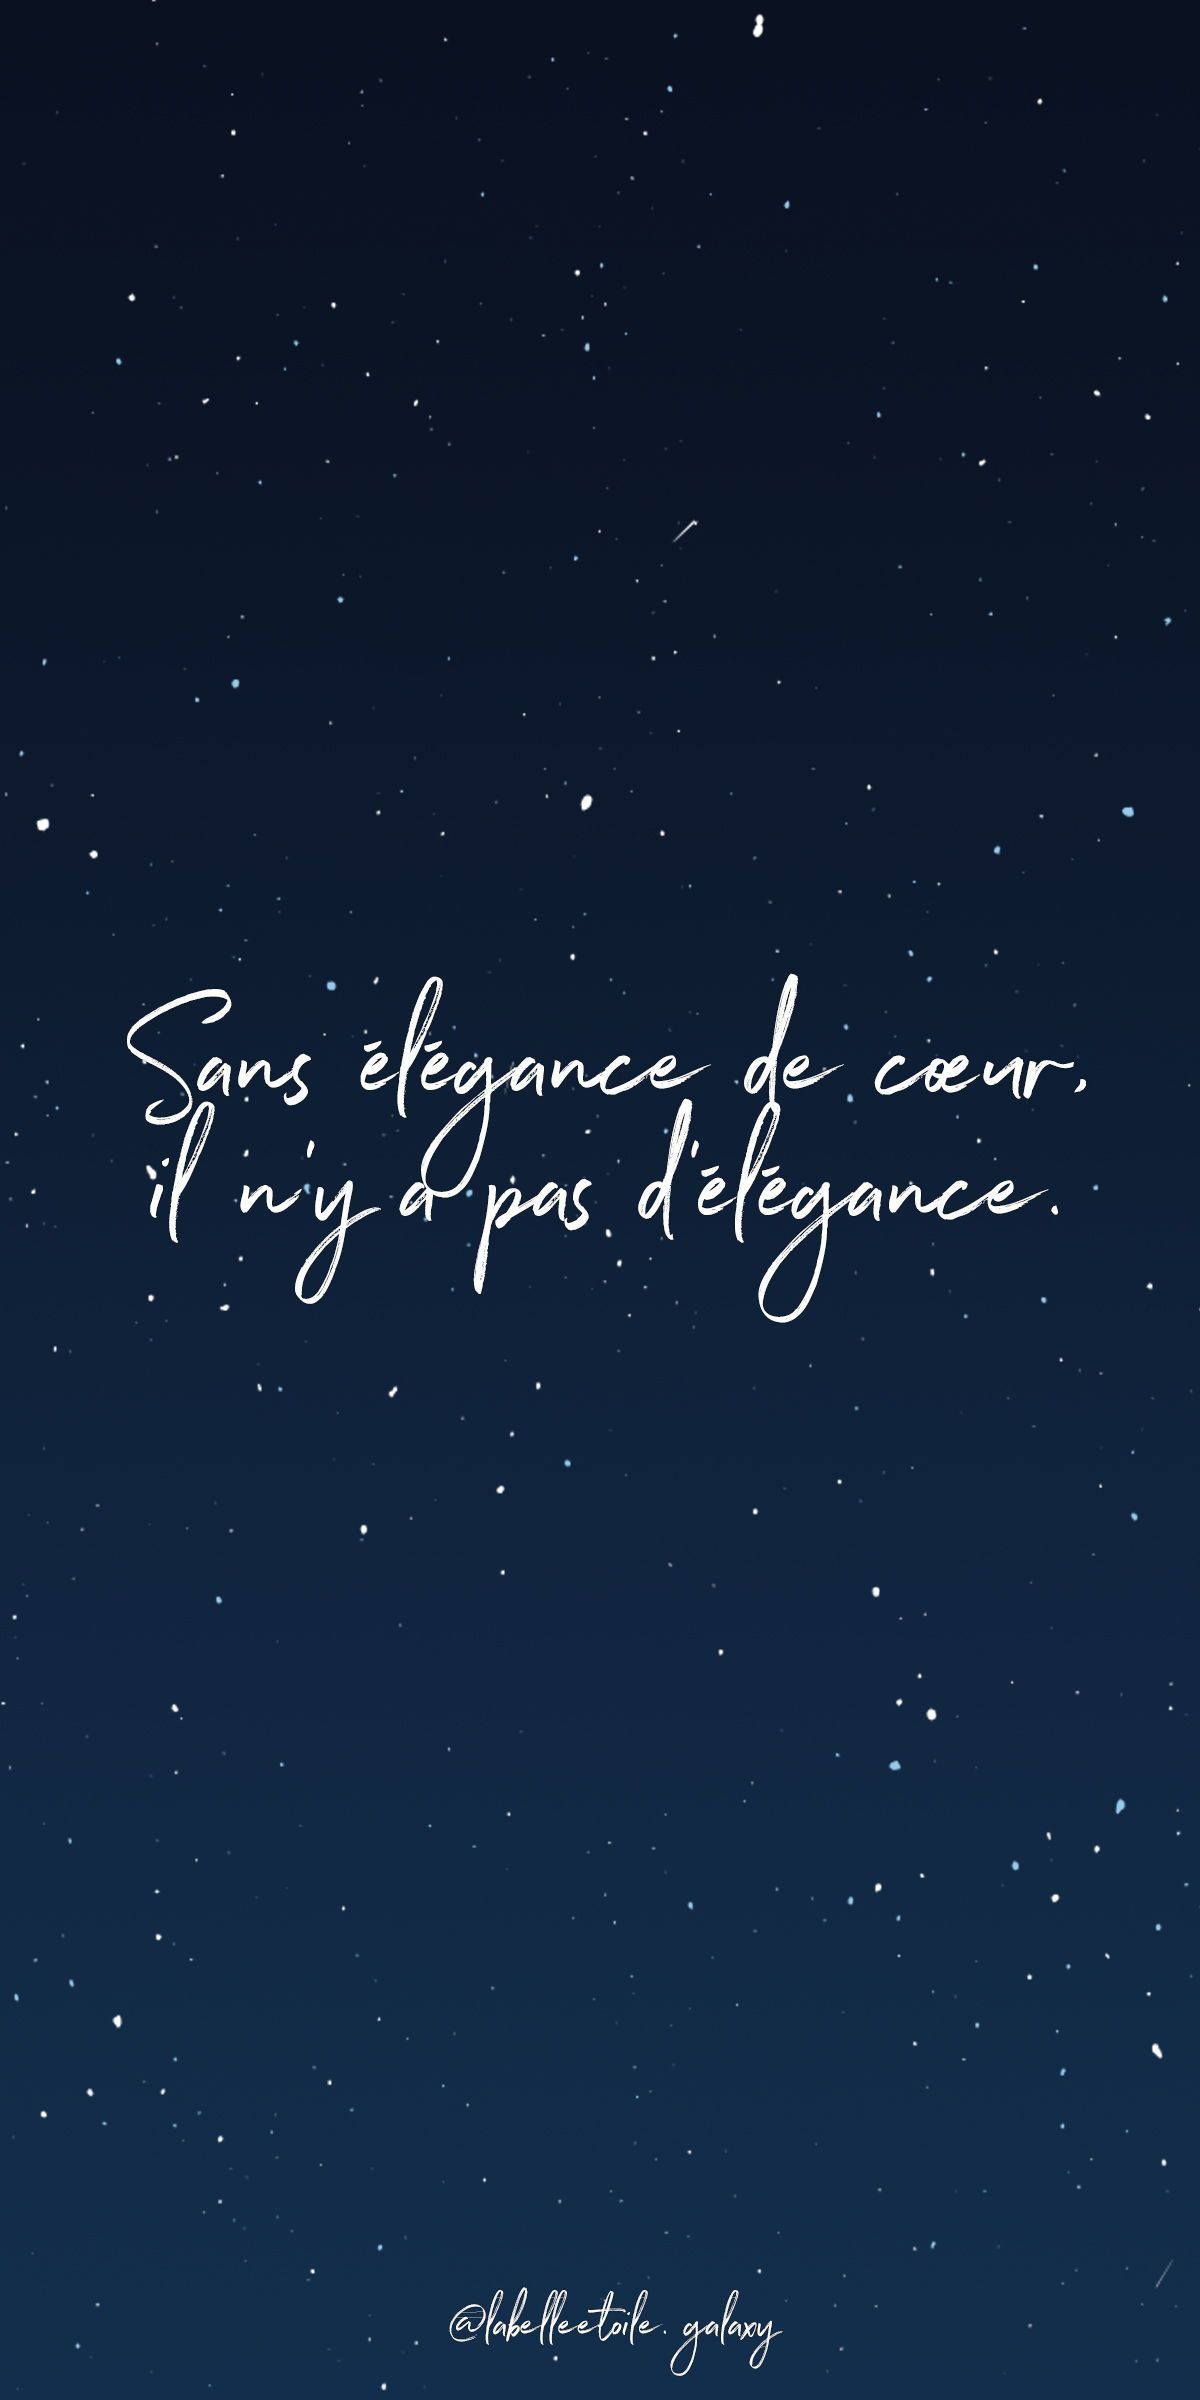 French Quotes Wallpapers - Wallpaper Cave